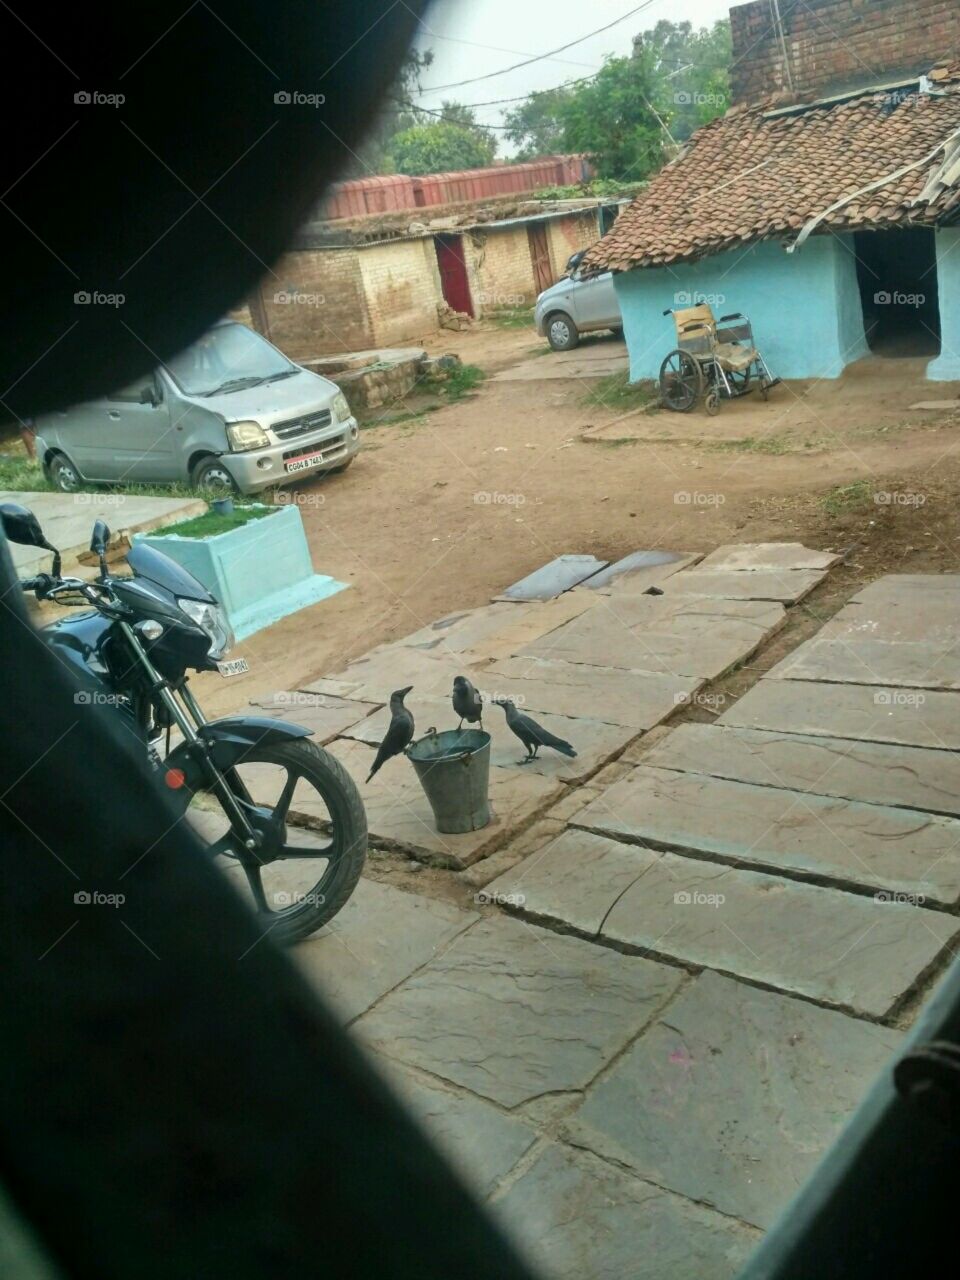 three crow attack for water bucket.